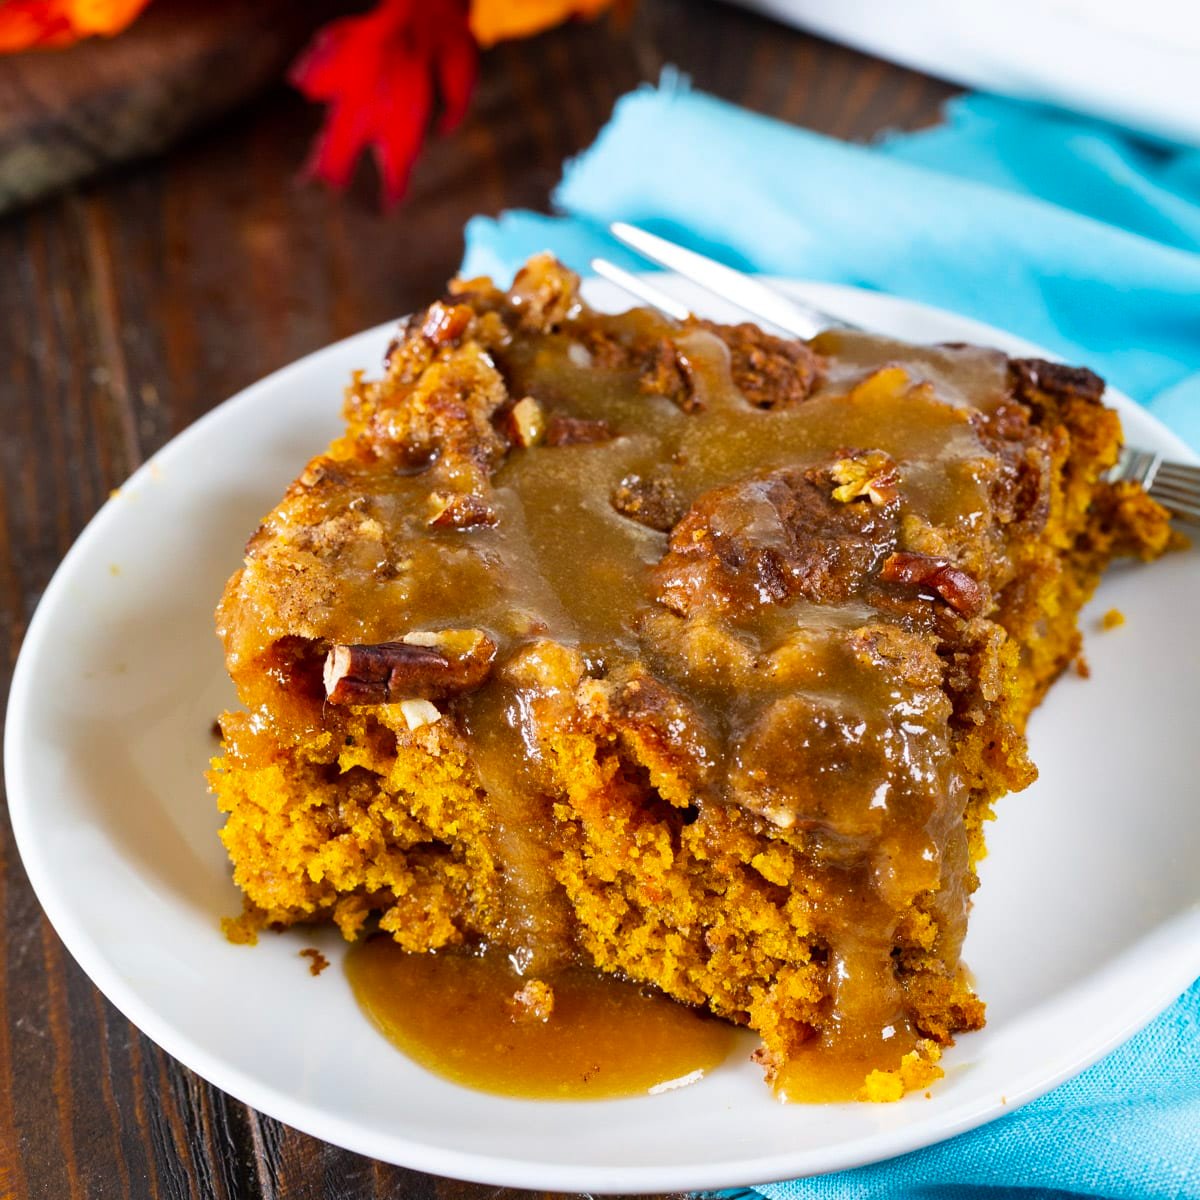 Piece of Pumpkin Coffee Cake with Brown Sugar Glaze on a small plate.